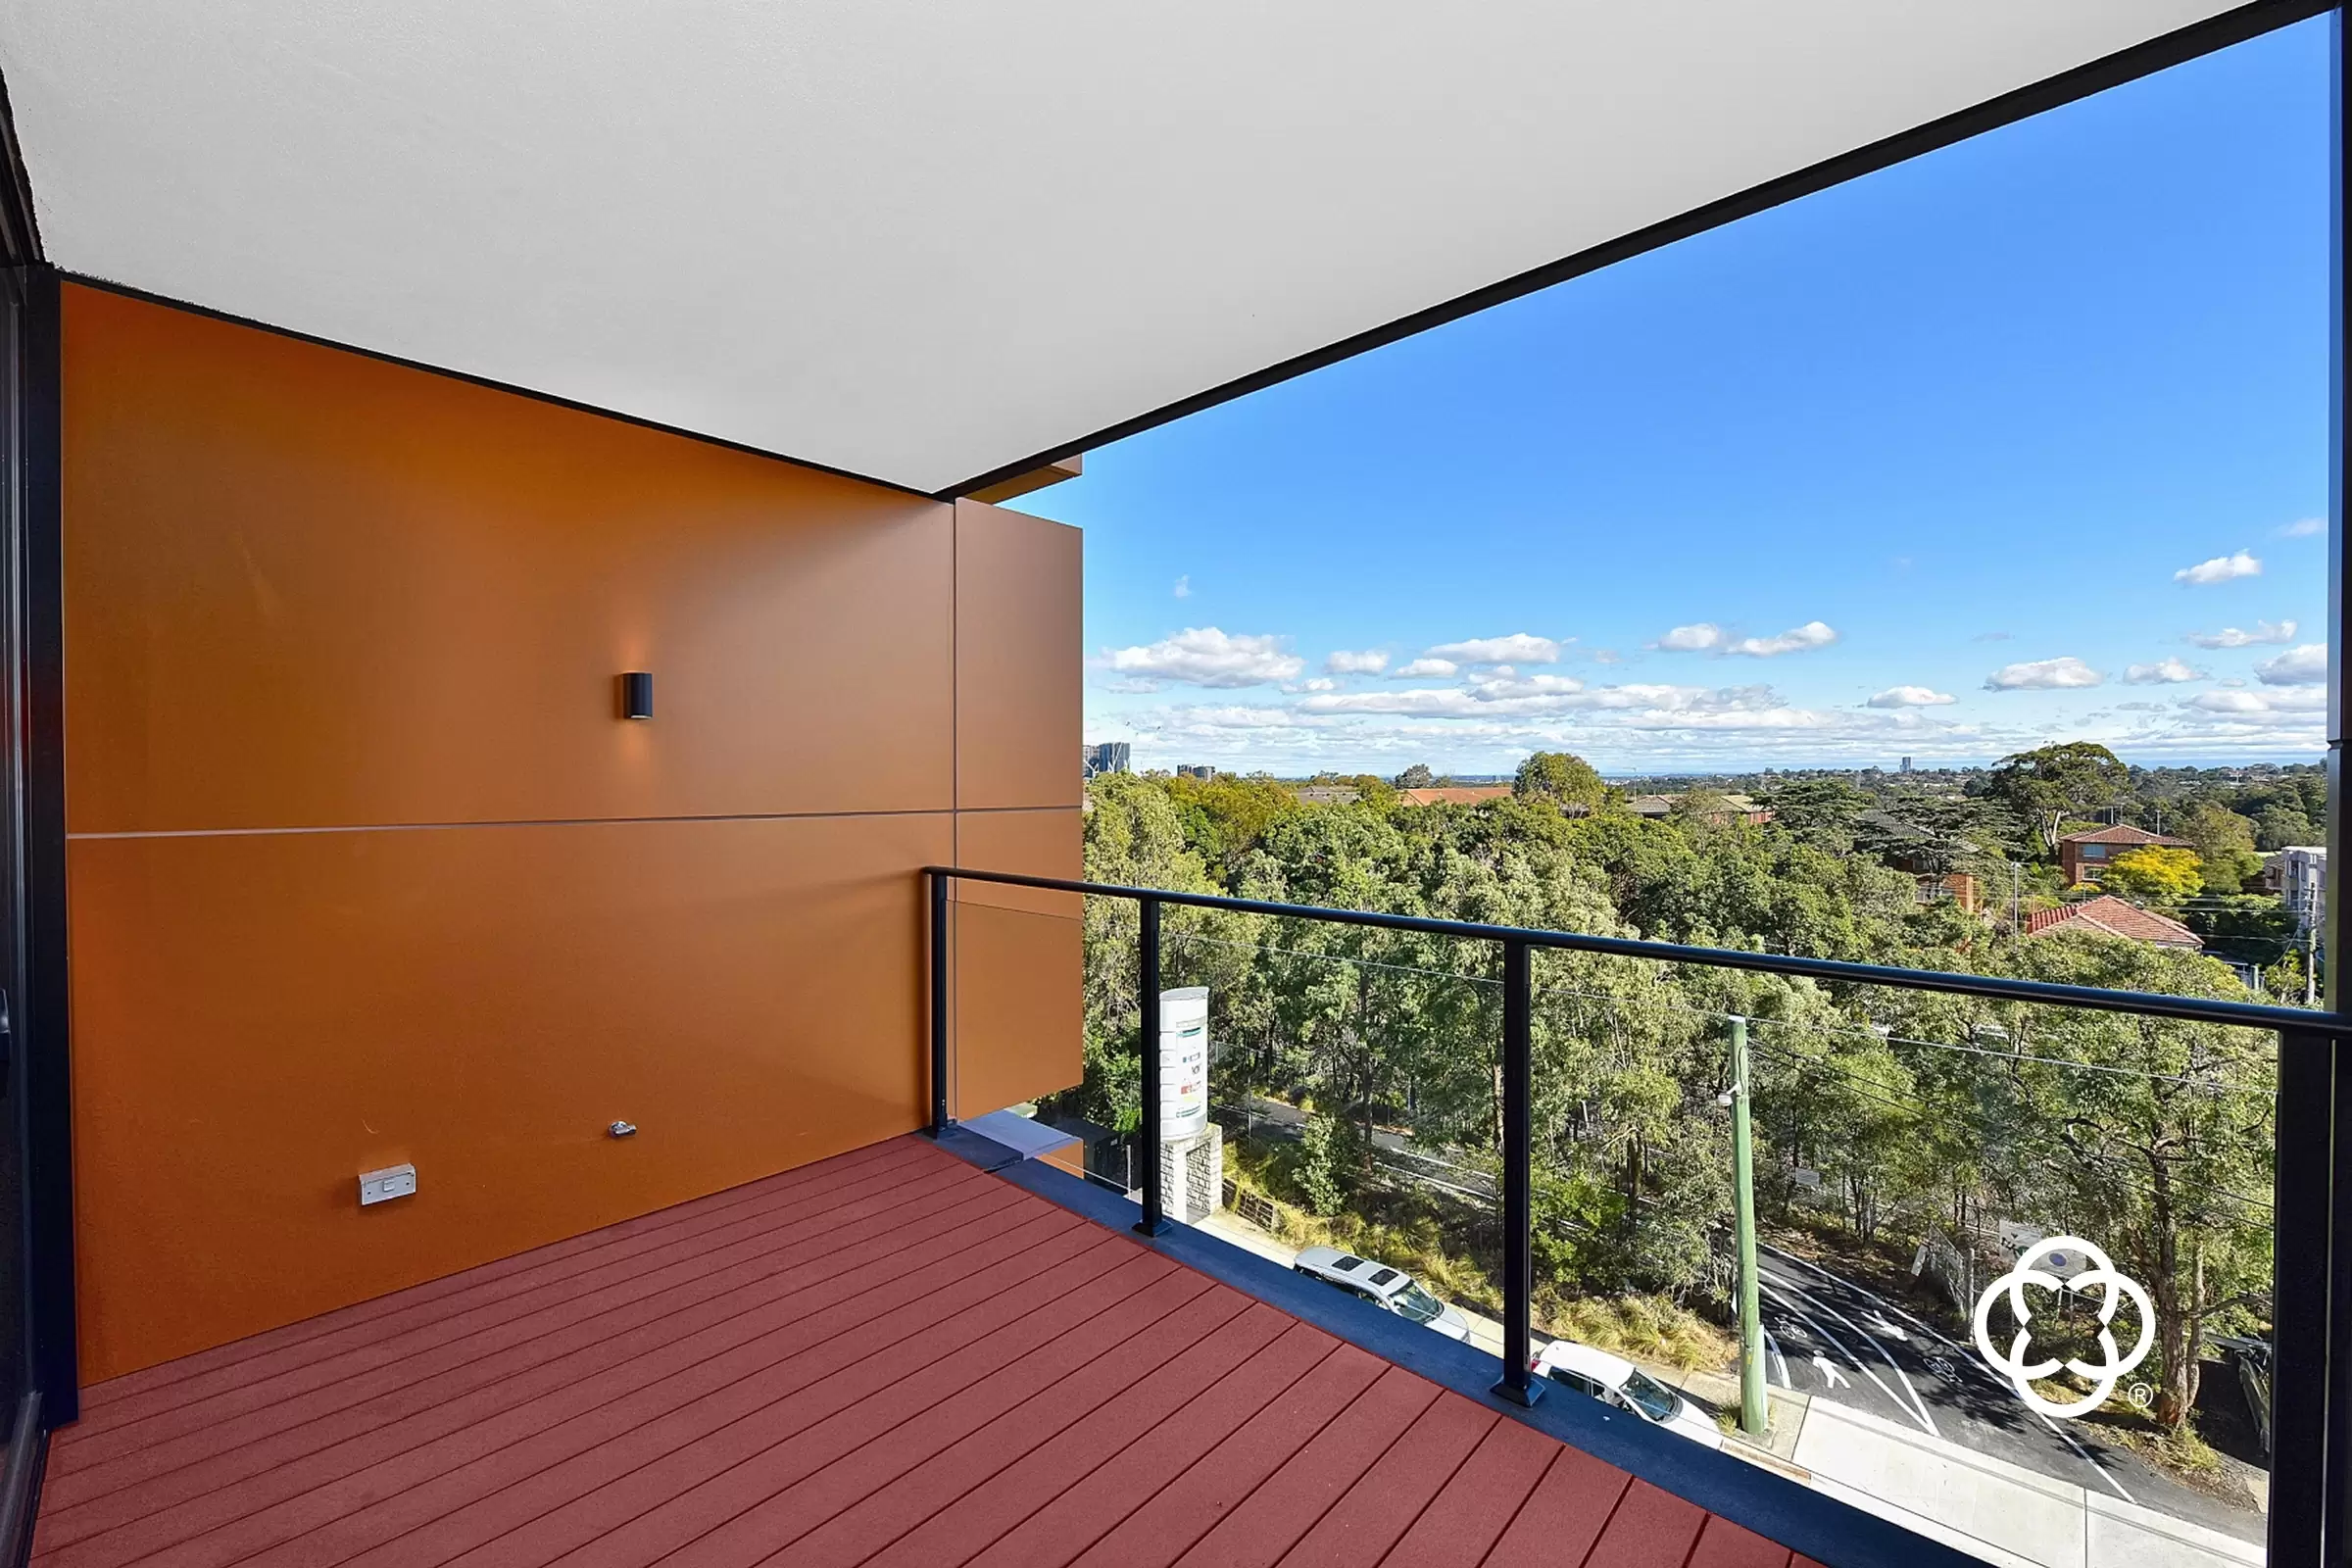 50/21 Bay Drive, Meadowbank Leased by Chidiac Realty - image 3